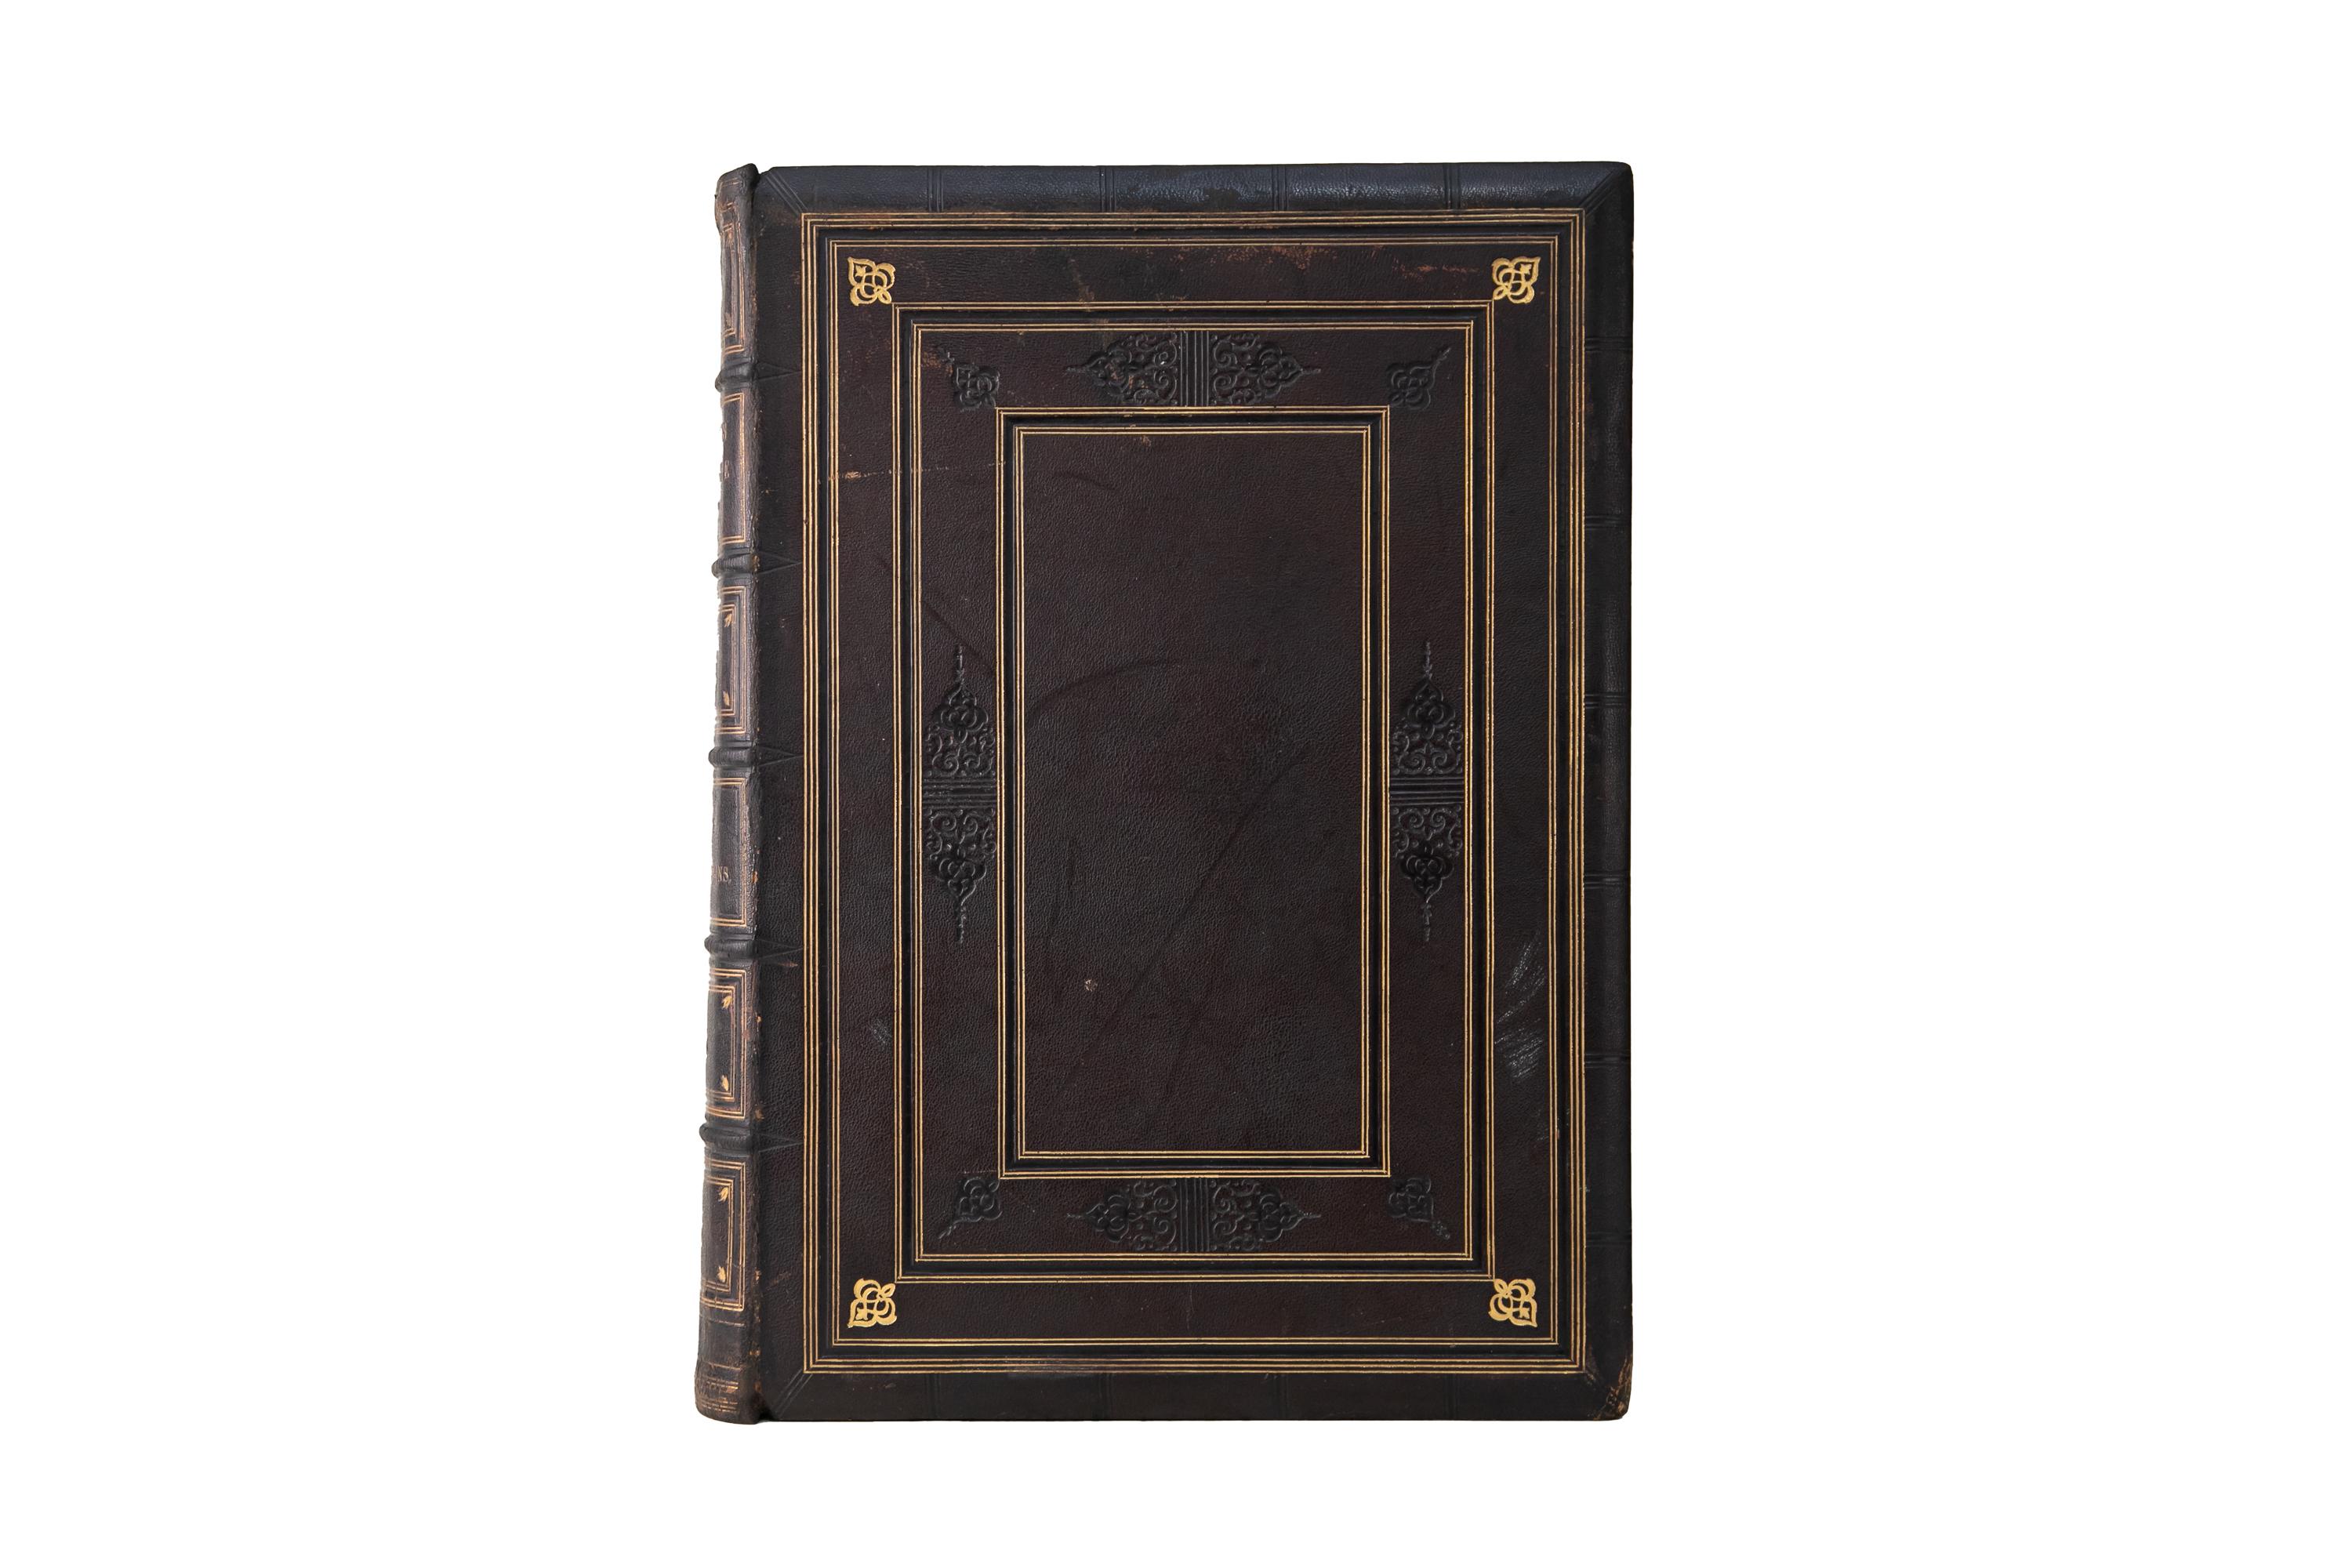 1 Volume. John Milton, Paradise Lost. Bound in full black morocco with the covers and raised band spines displaying gilt and open-tooled detailing. All edges are gilt with gilt-tooled tern-ns and marbled endpapers. Illustrated by Gustave Doré. With